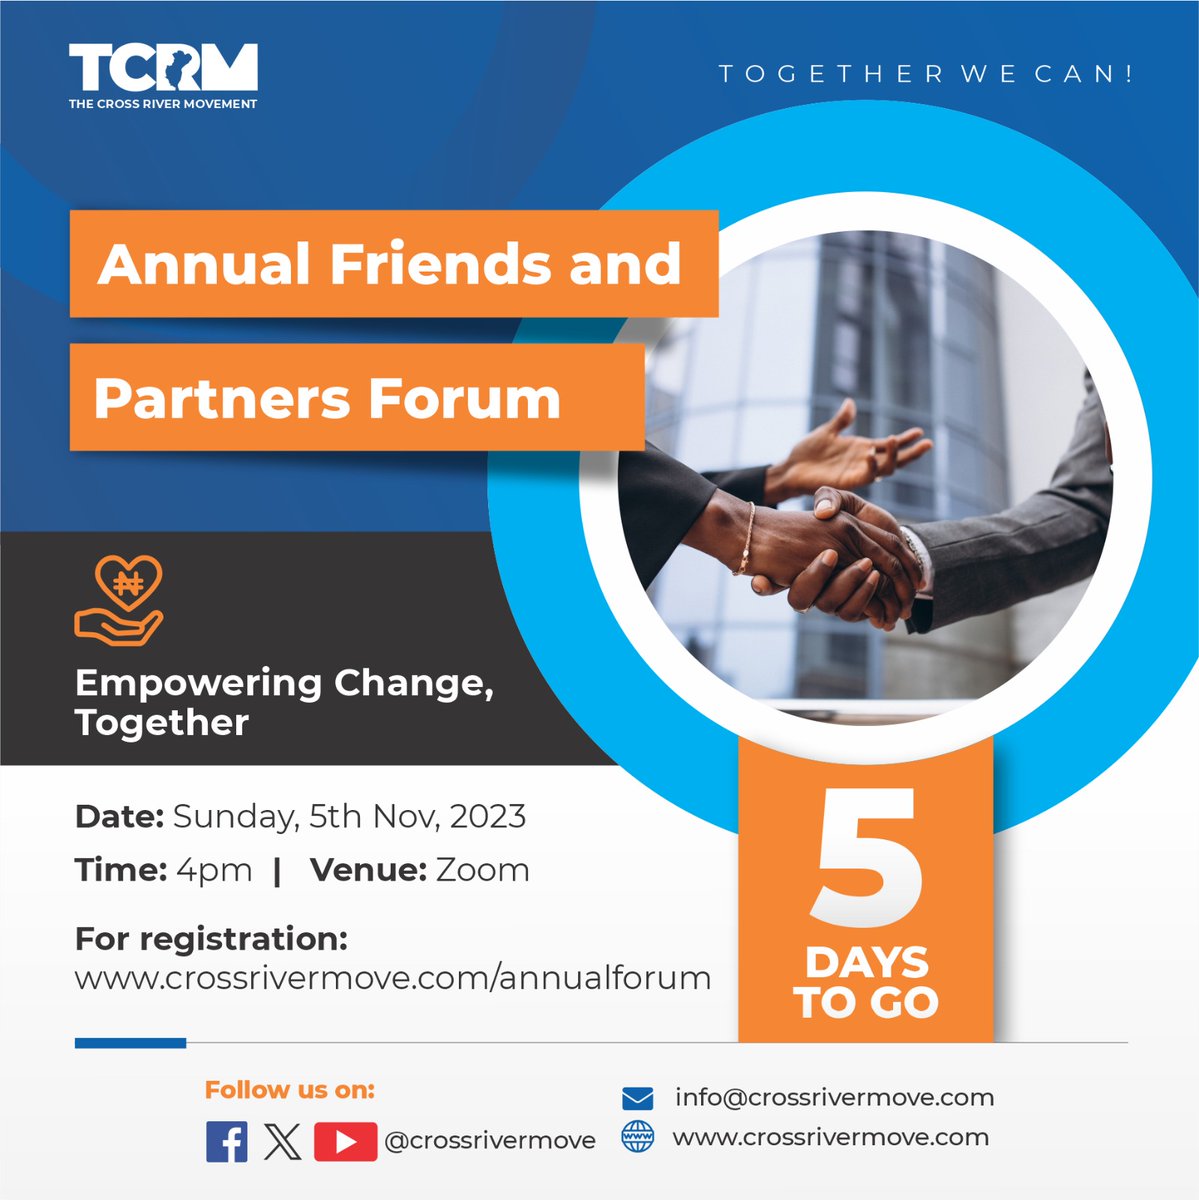 Join the TCRM WhatsApp community for more details and updates by clicking here: [TCRM WhatsApp Community](bit.ly/TCRMcommunity)

*RSVP:* 
info@crossrivermove.com 
crossrivermove.com/annualforum

*Together, we can...*

#TCRM #TheCrossriverMovement #GoodGovernance #CrossRiver